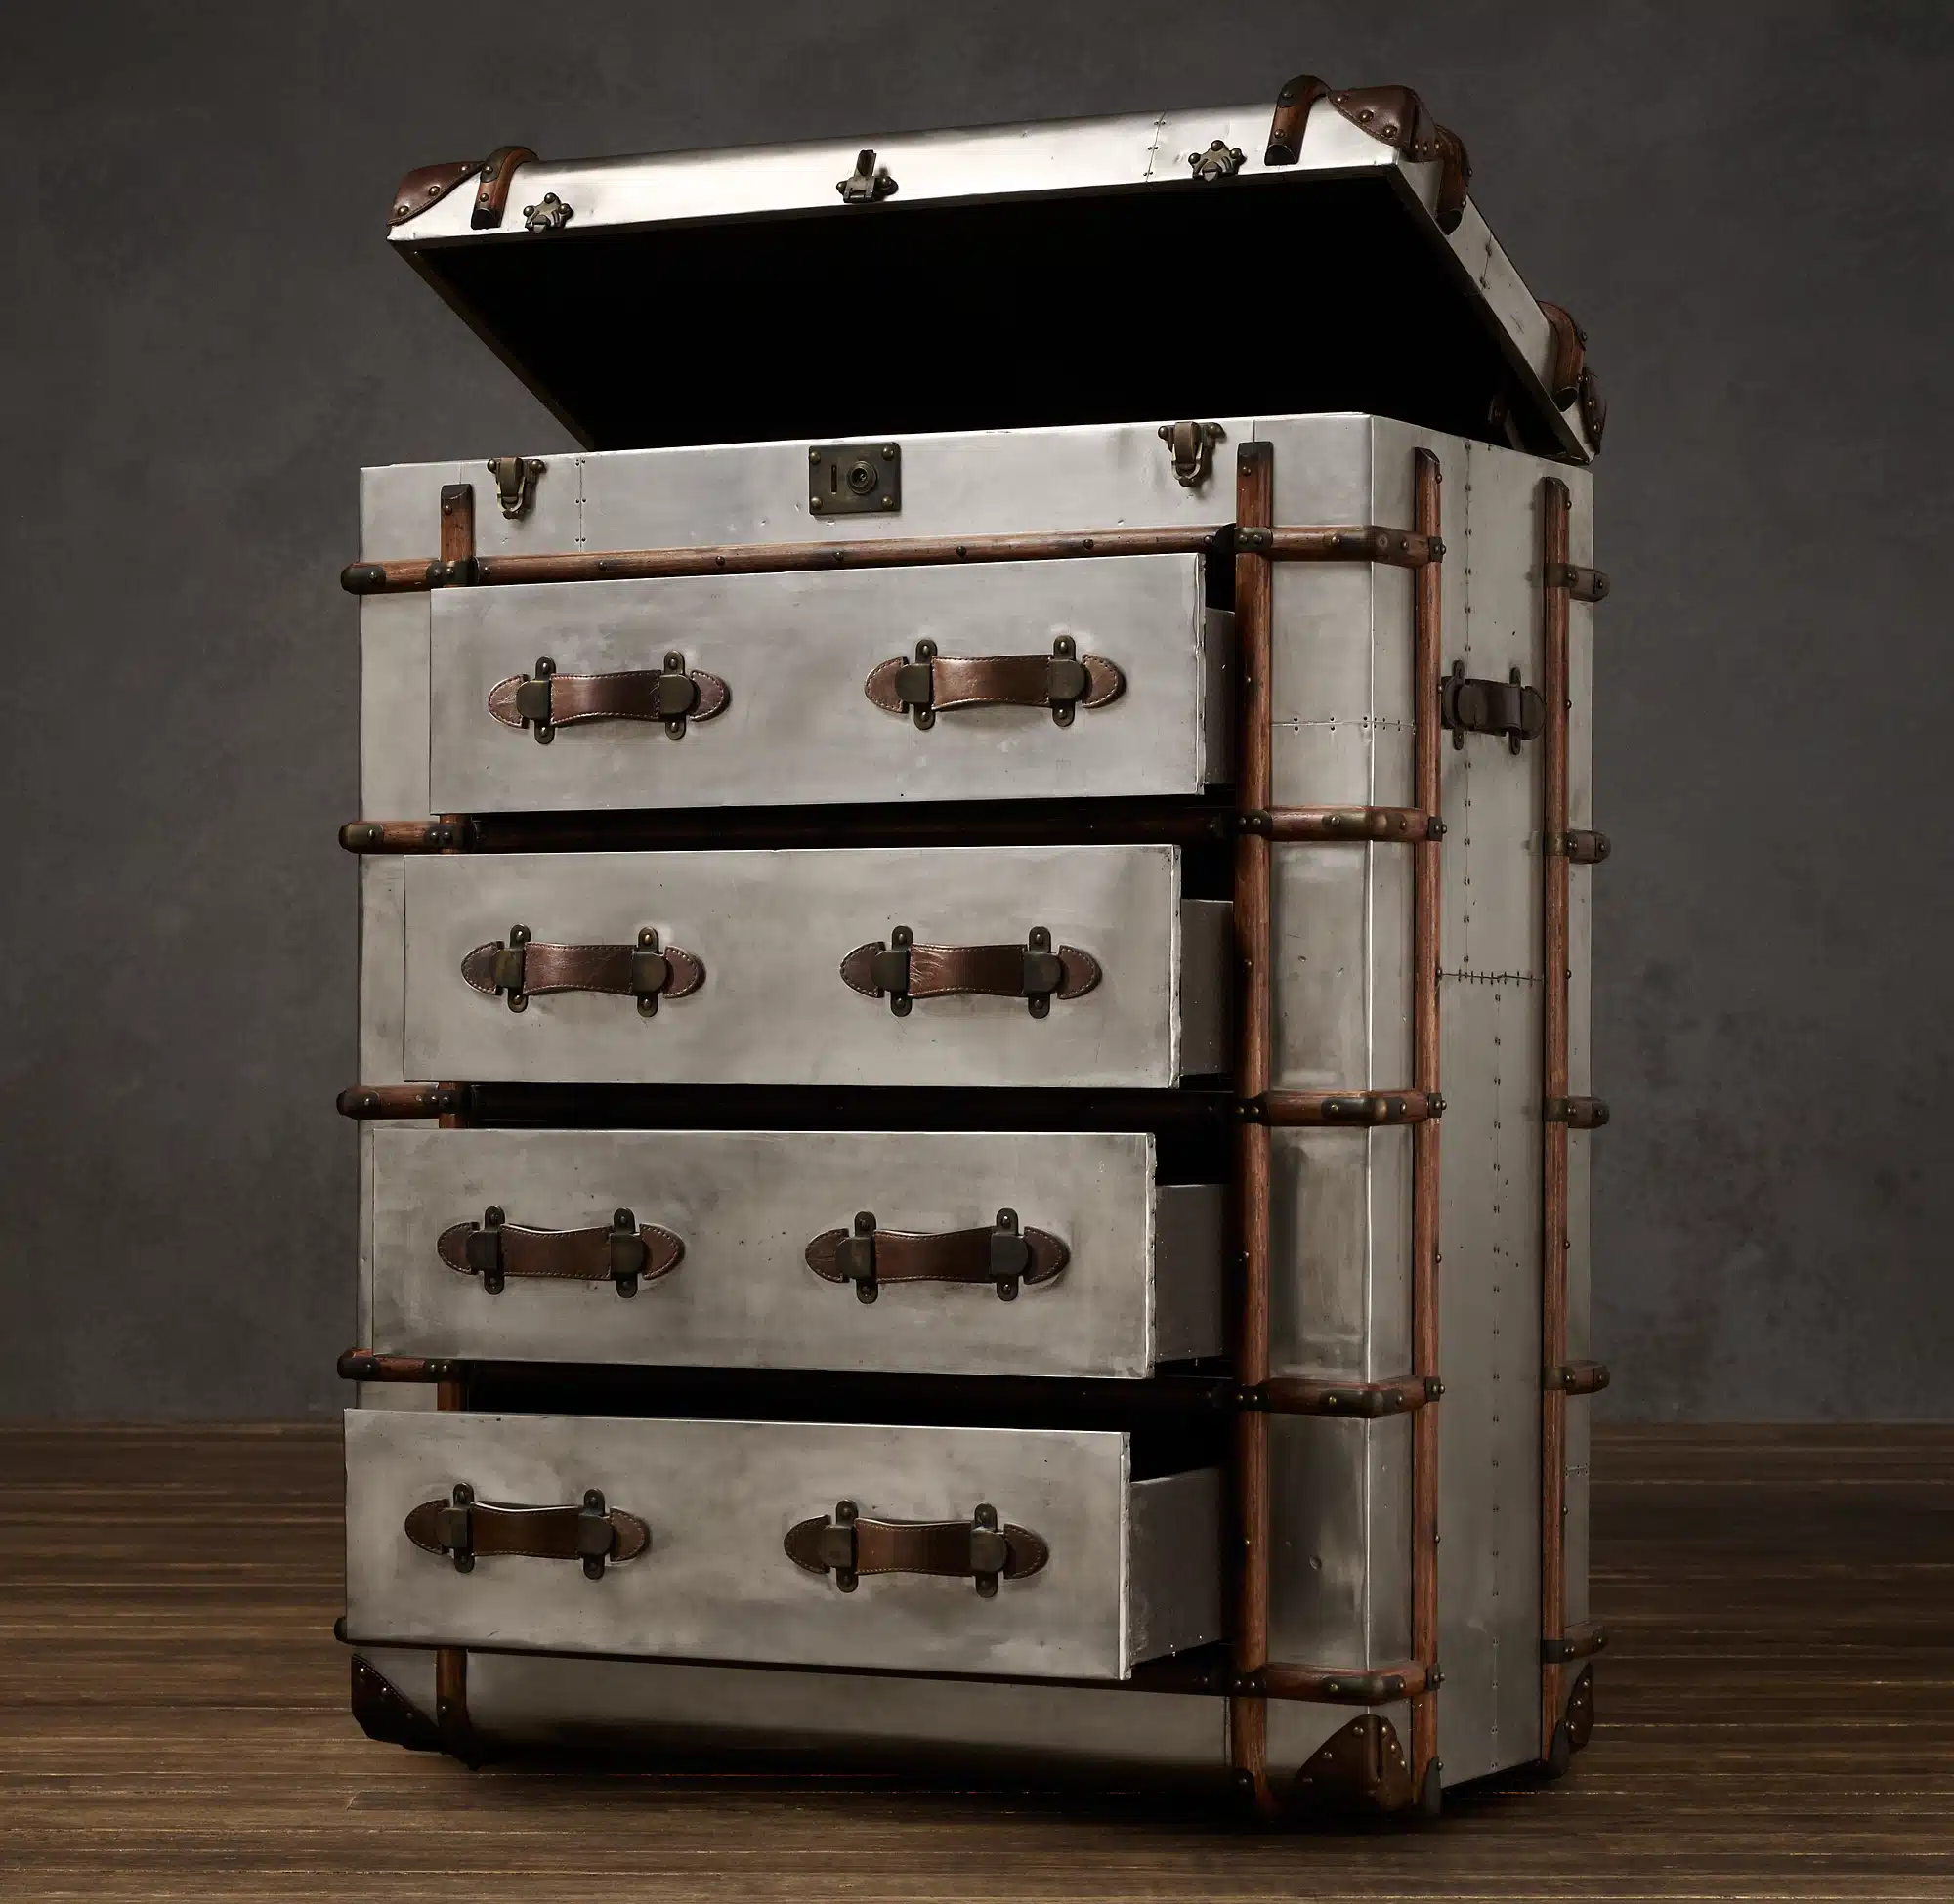 The Richard Trunk chest large is inspired by a worn, custom-made steamer Trunk.